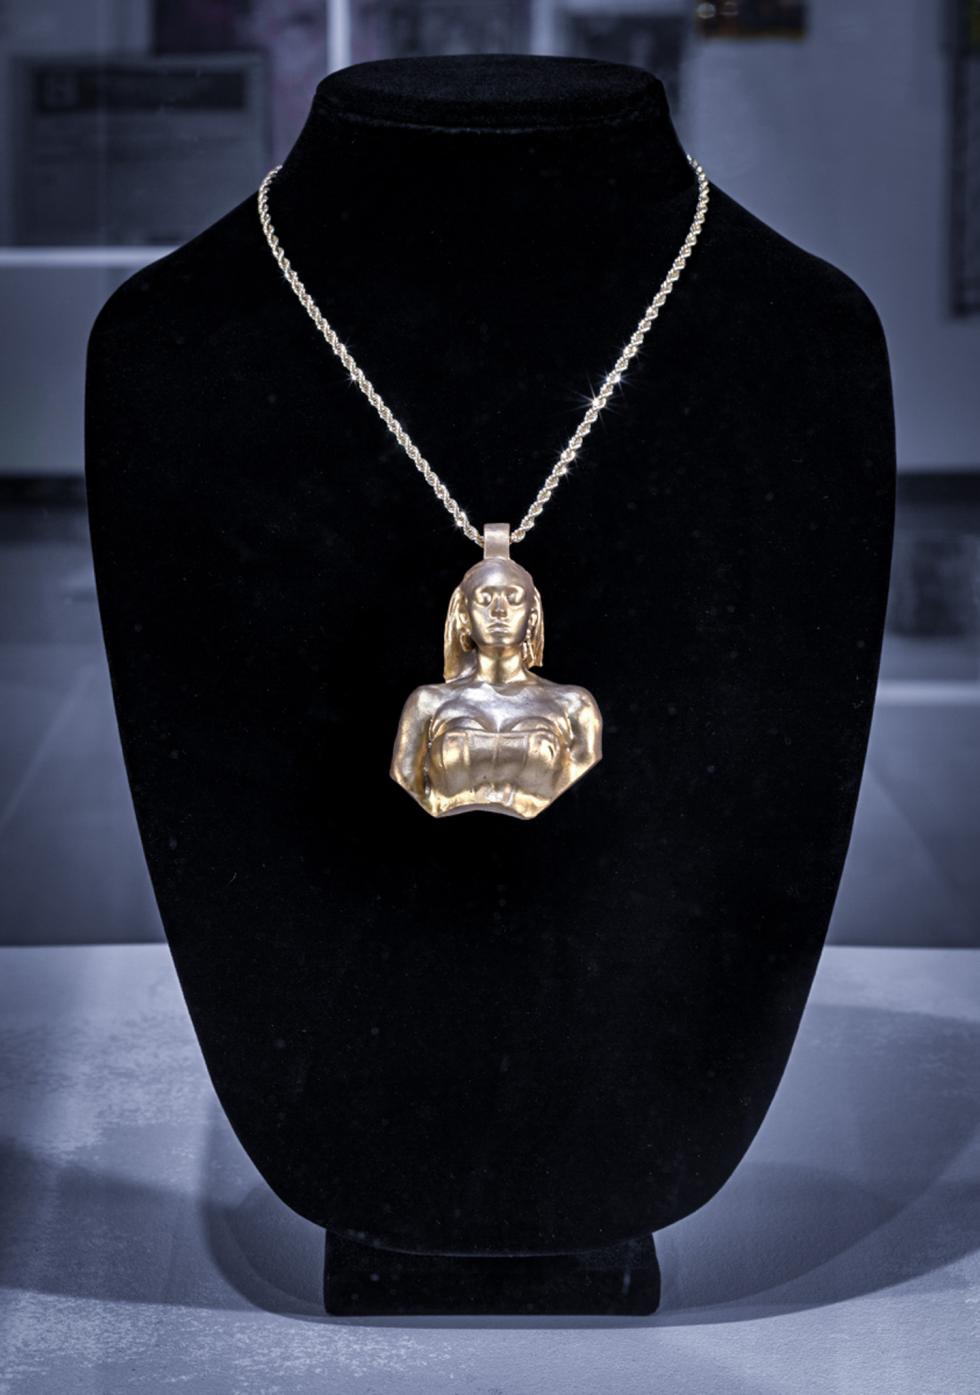 A gold pendant of a woman's bust is hung on a black velvet jewelry display